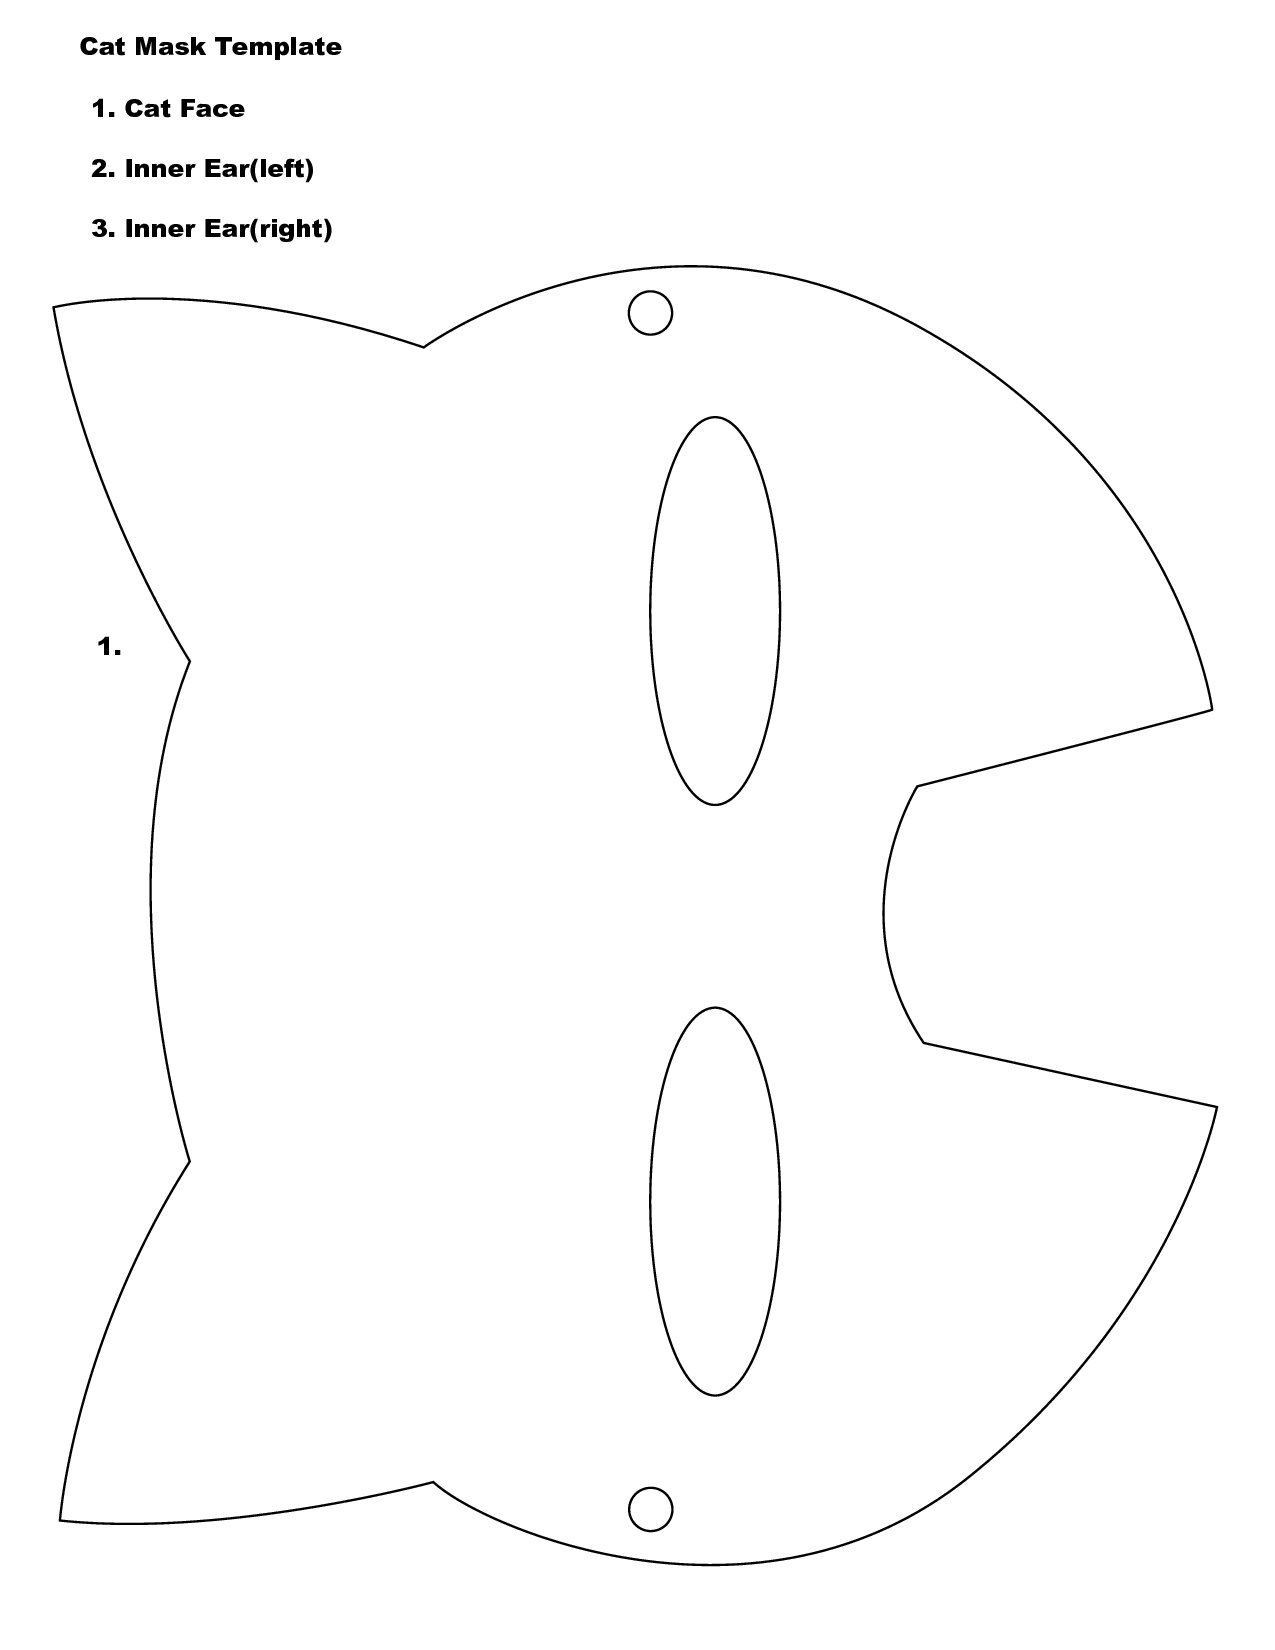 Cat Face Template Printable images